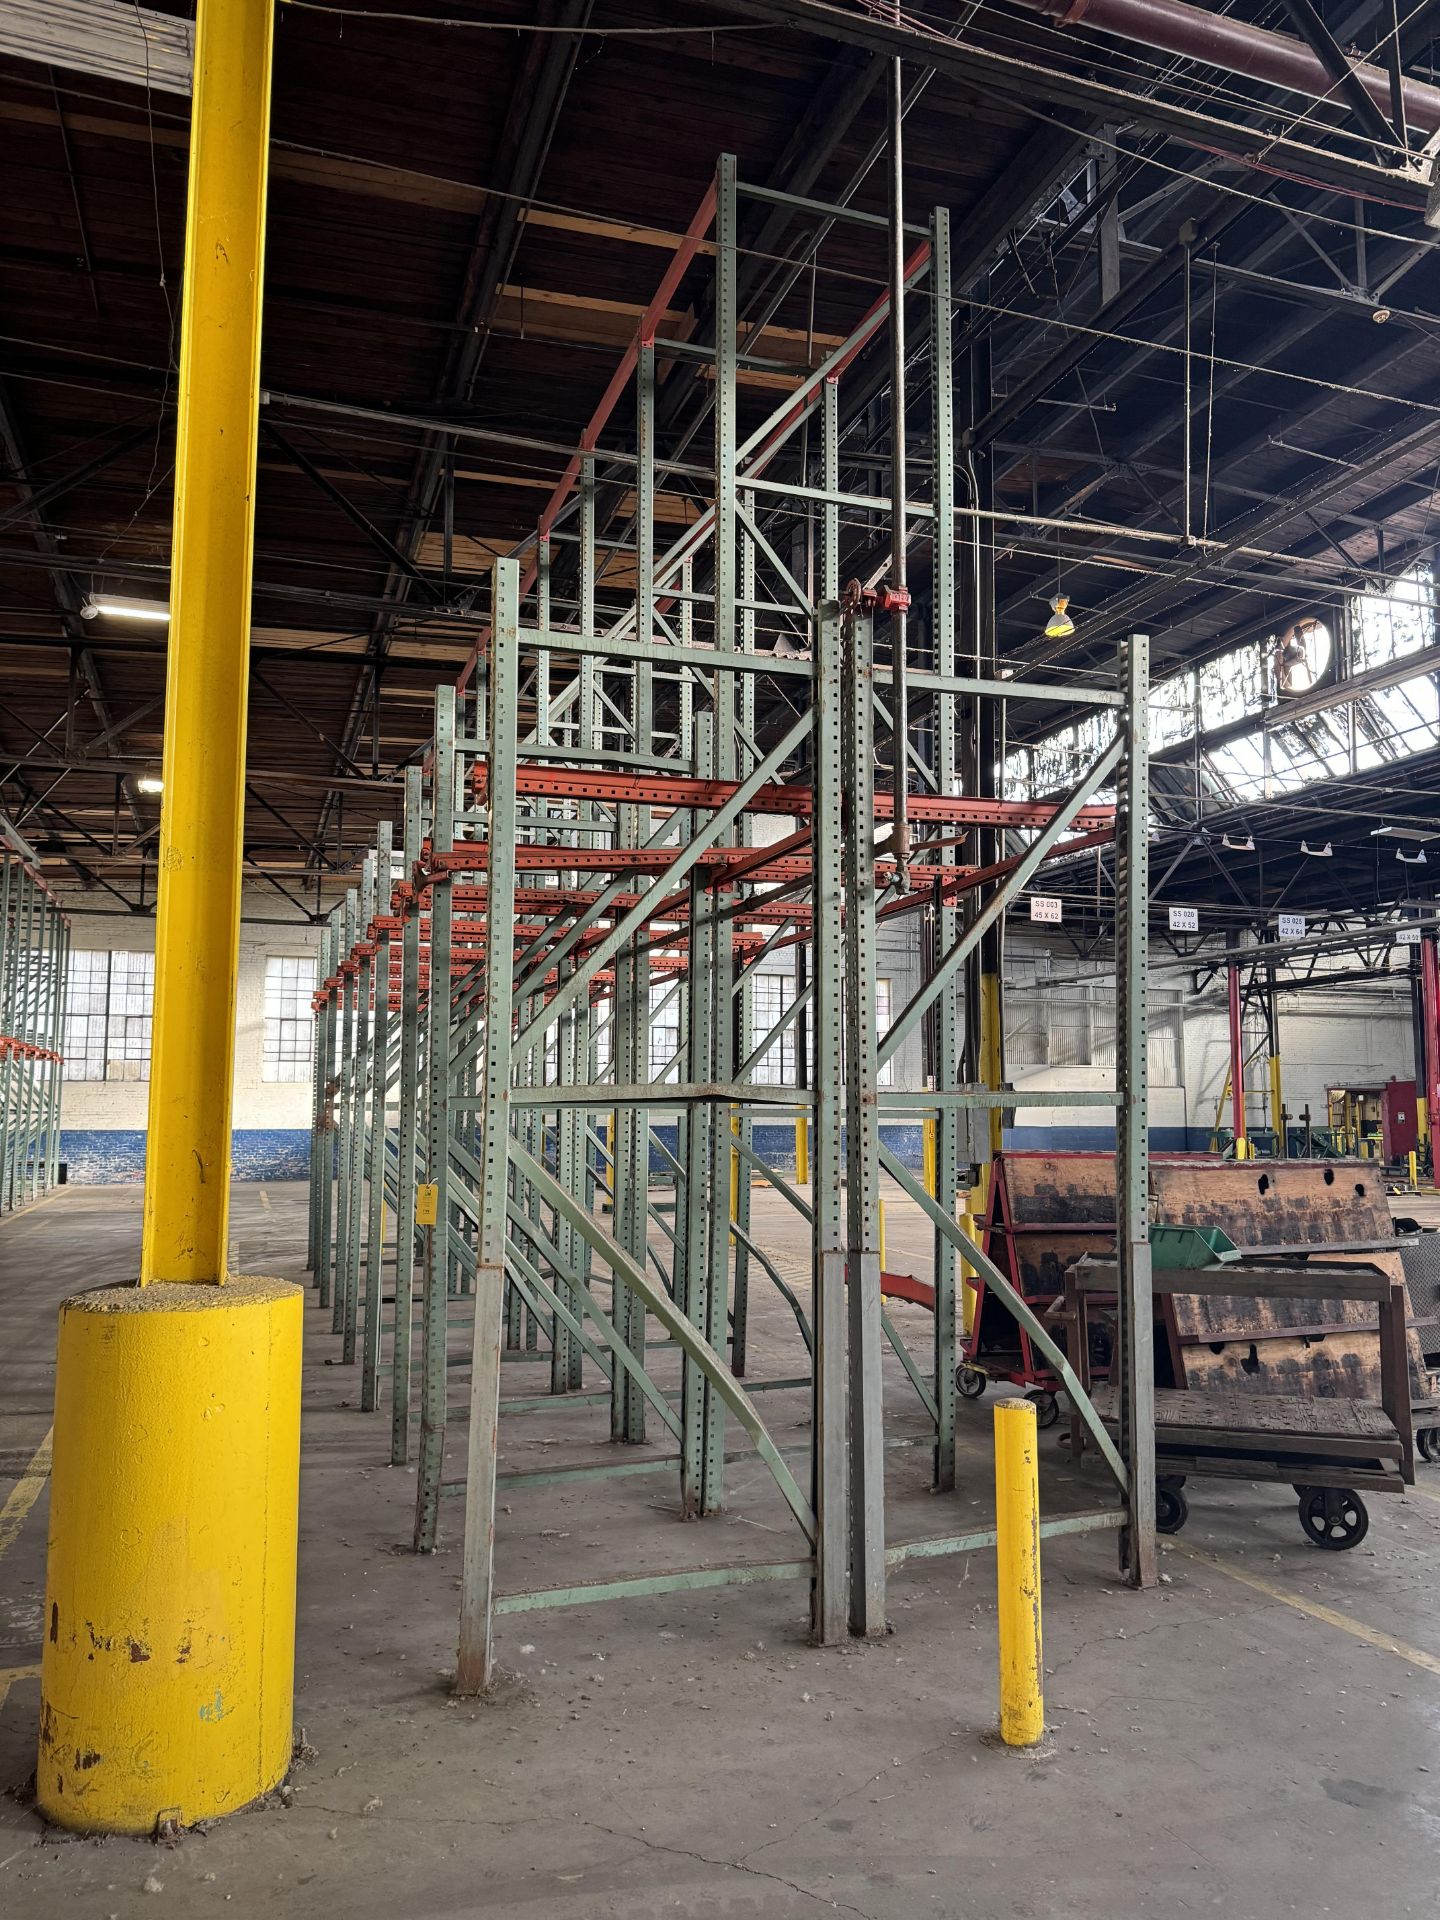 Pallet Racking, Qty 10 Uprights, Rigging/ Removal Fee - $700